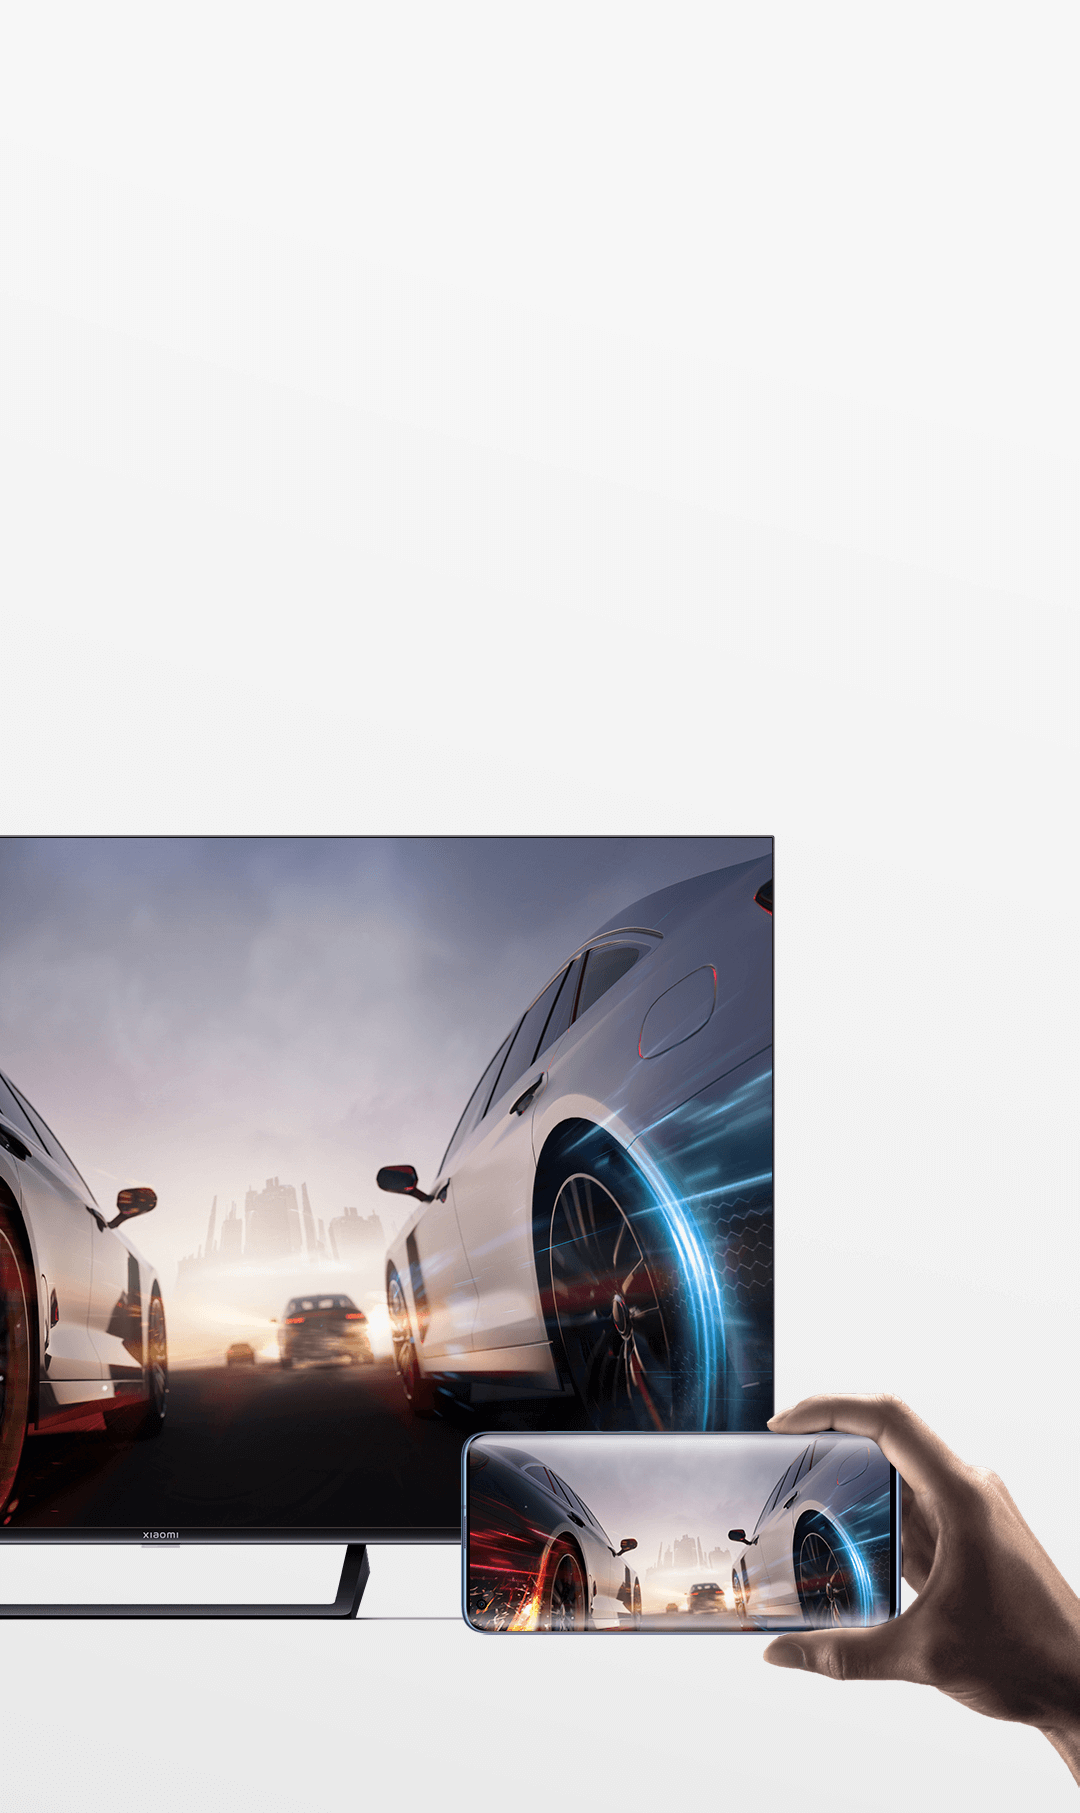 Xiaomi TV A2 is a new series of smart TVs for the global market